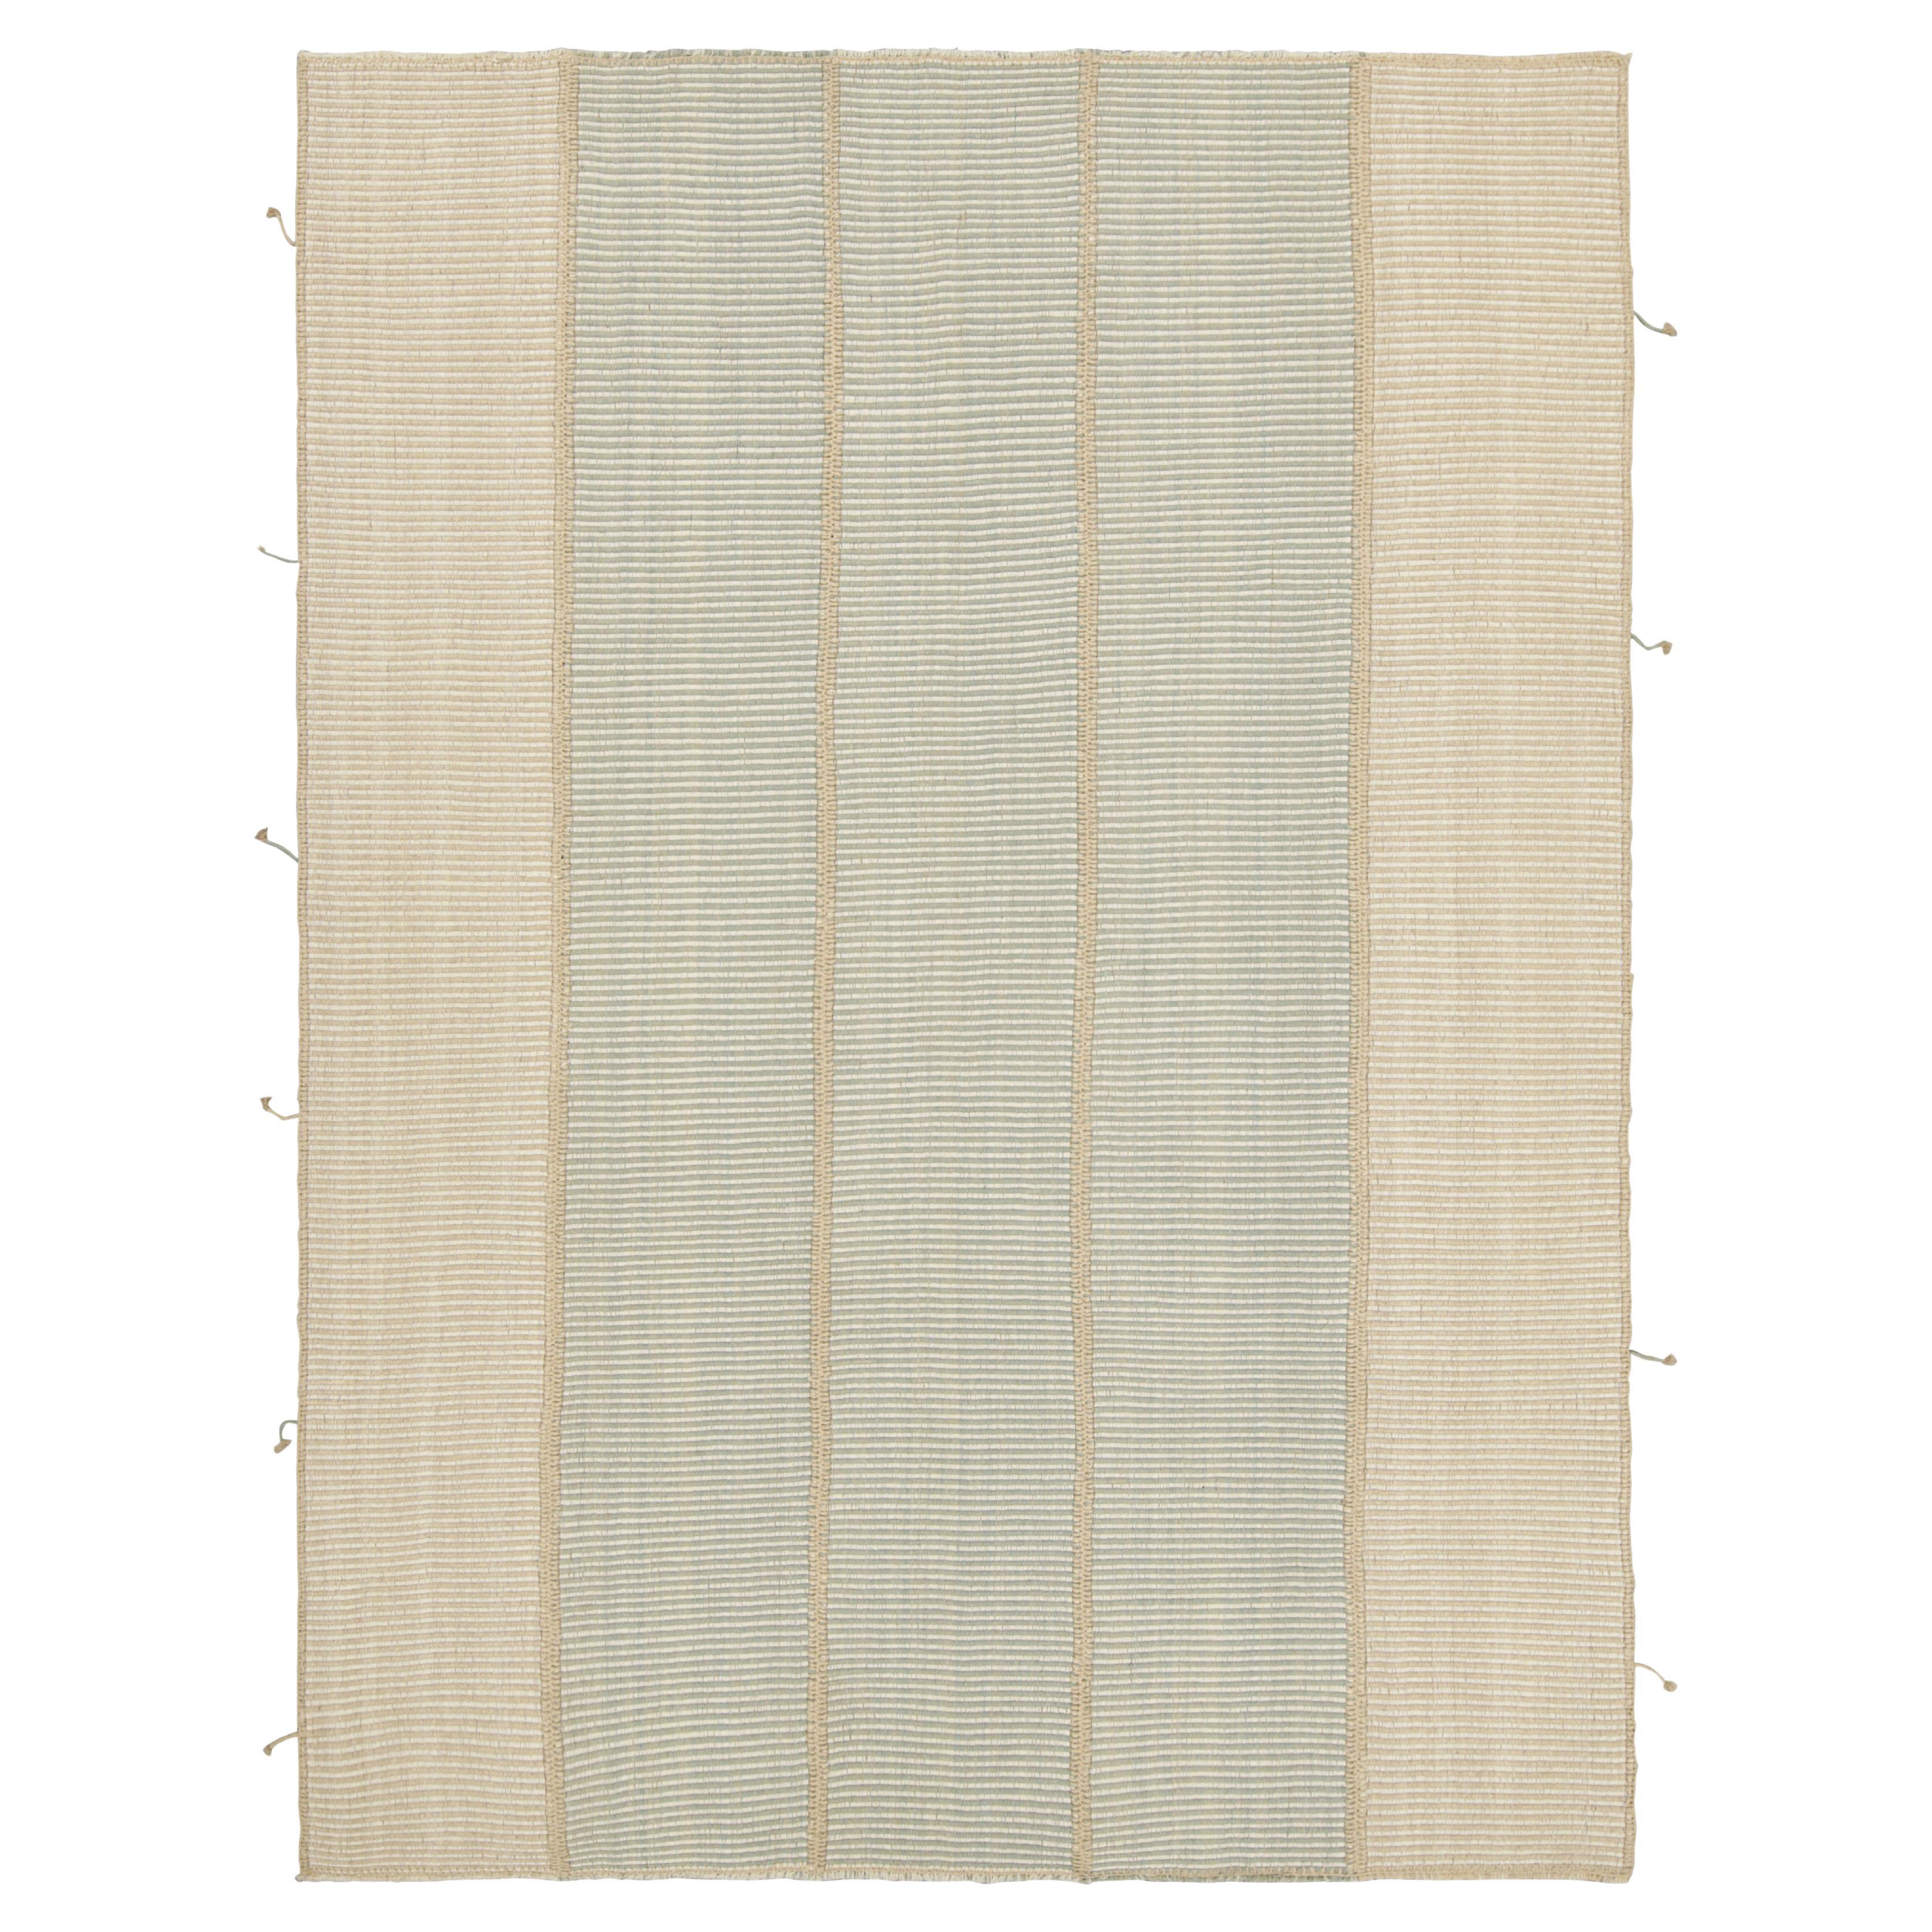 Rug & Kilim’s Contemporary Kilim in Beige and Blue Textural Stripes